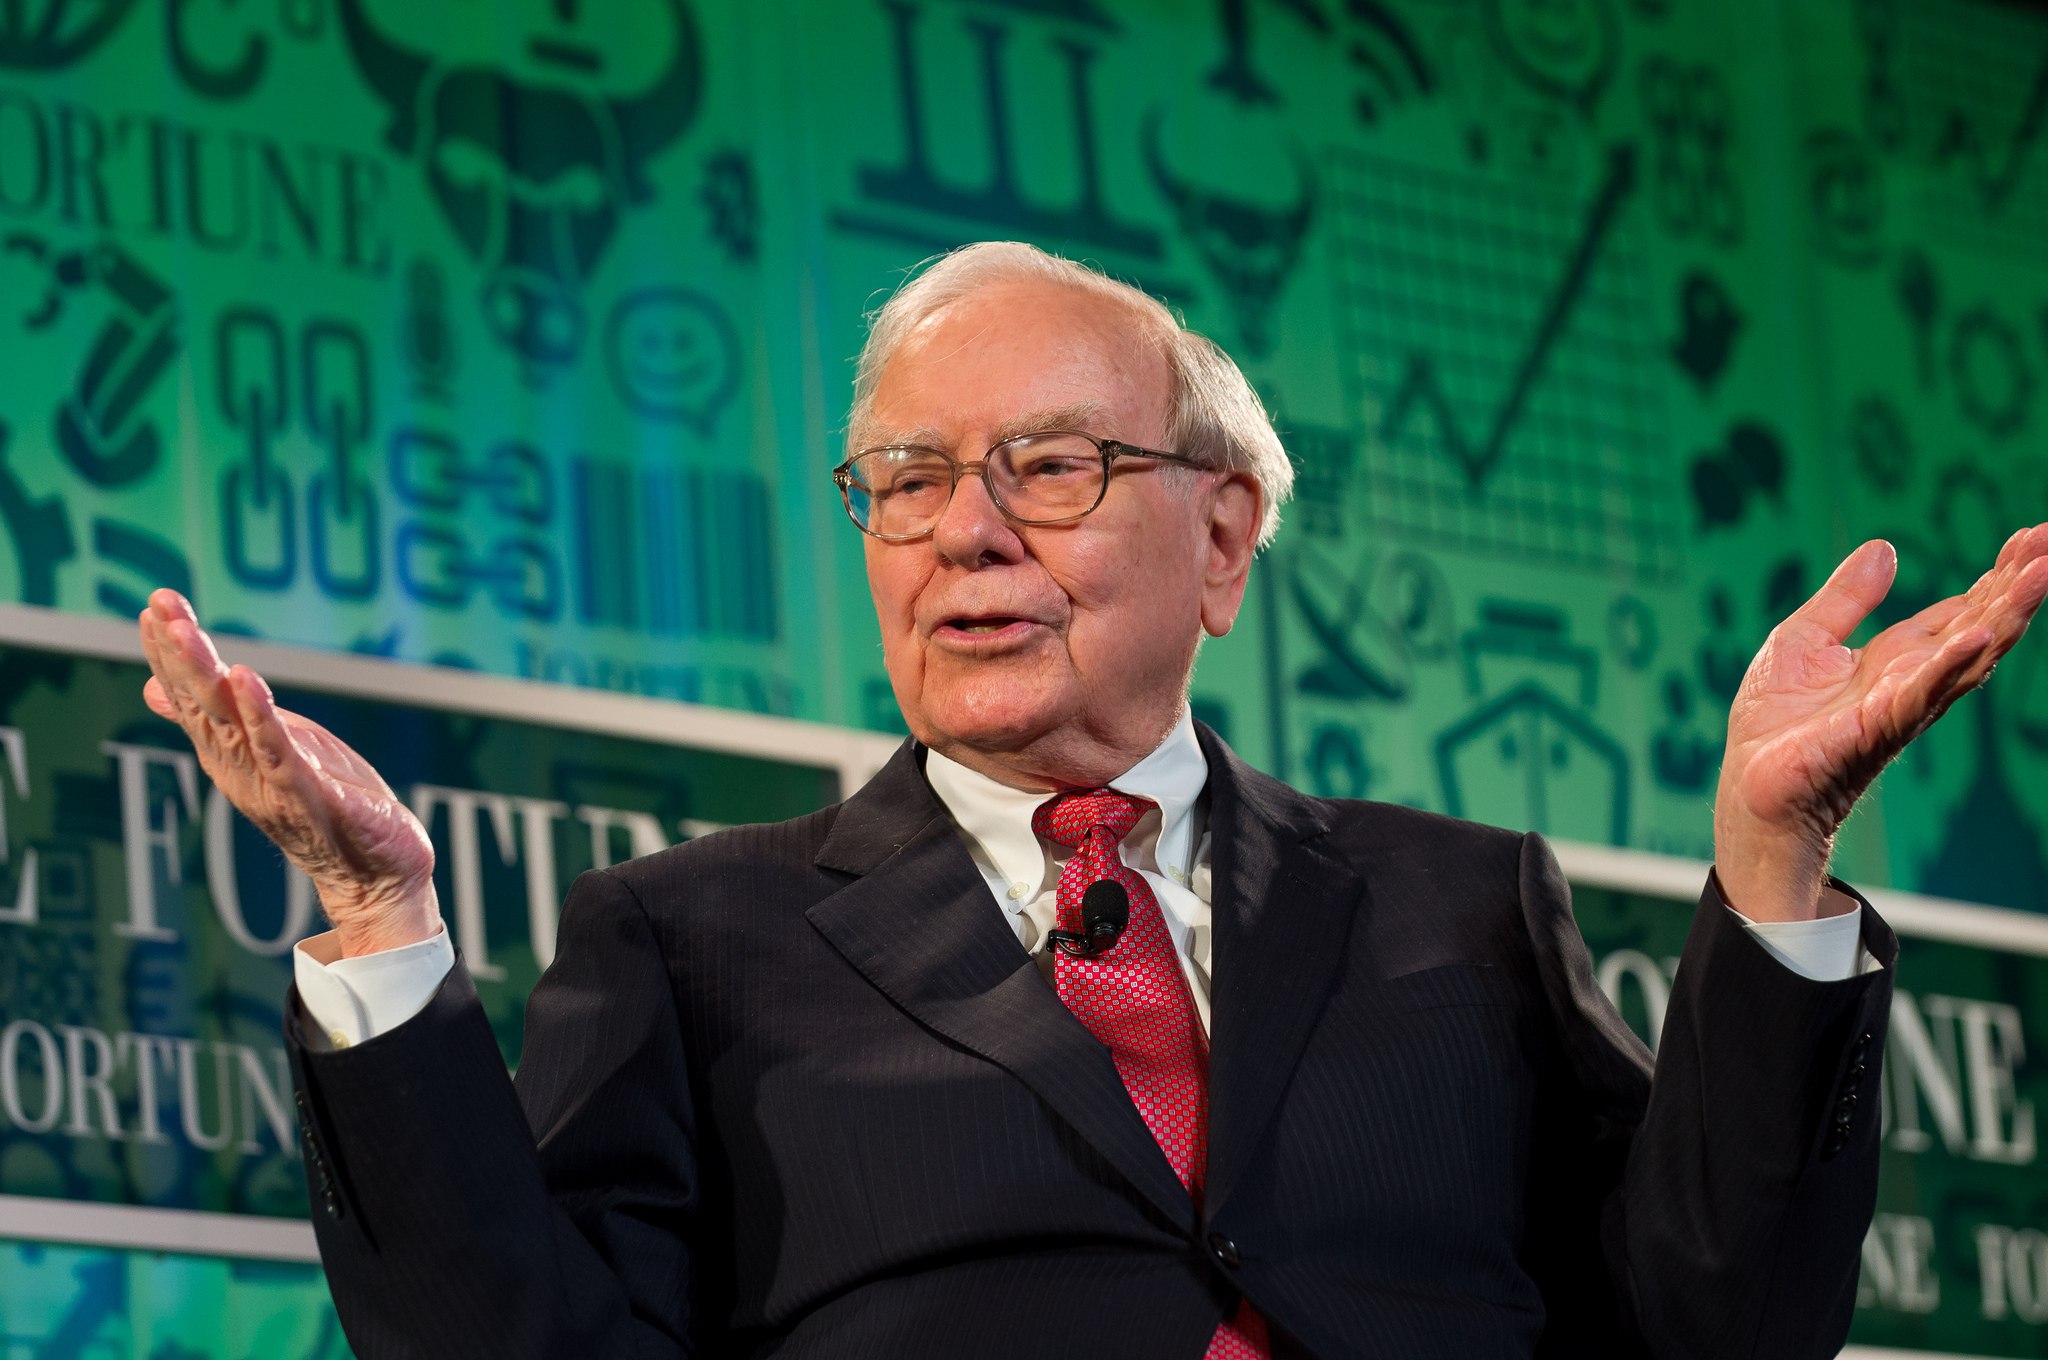 10 Warren Buffett Quotes to Live By